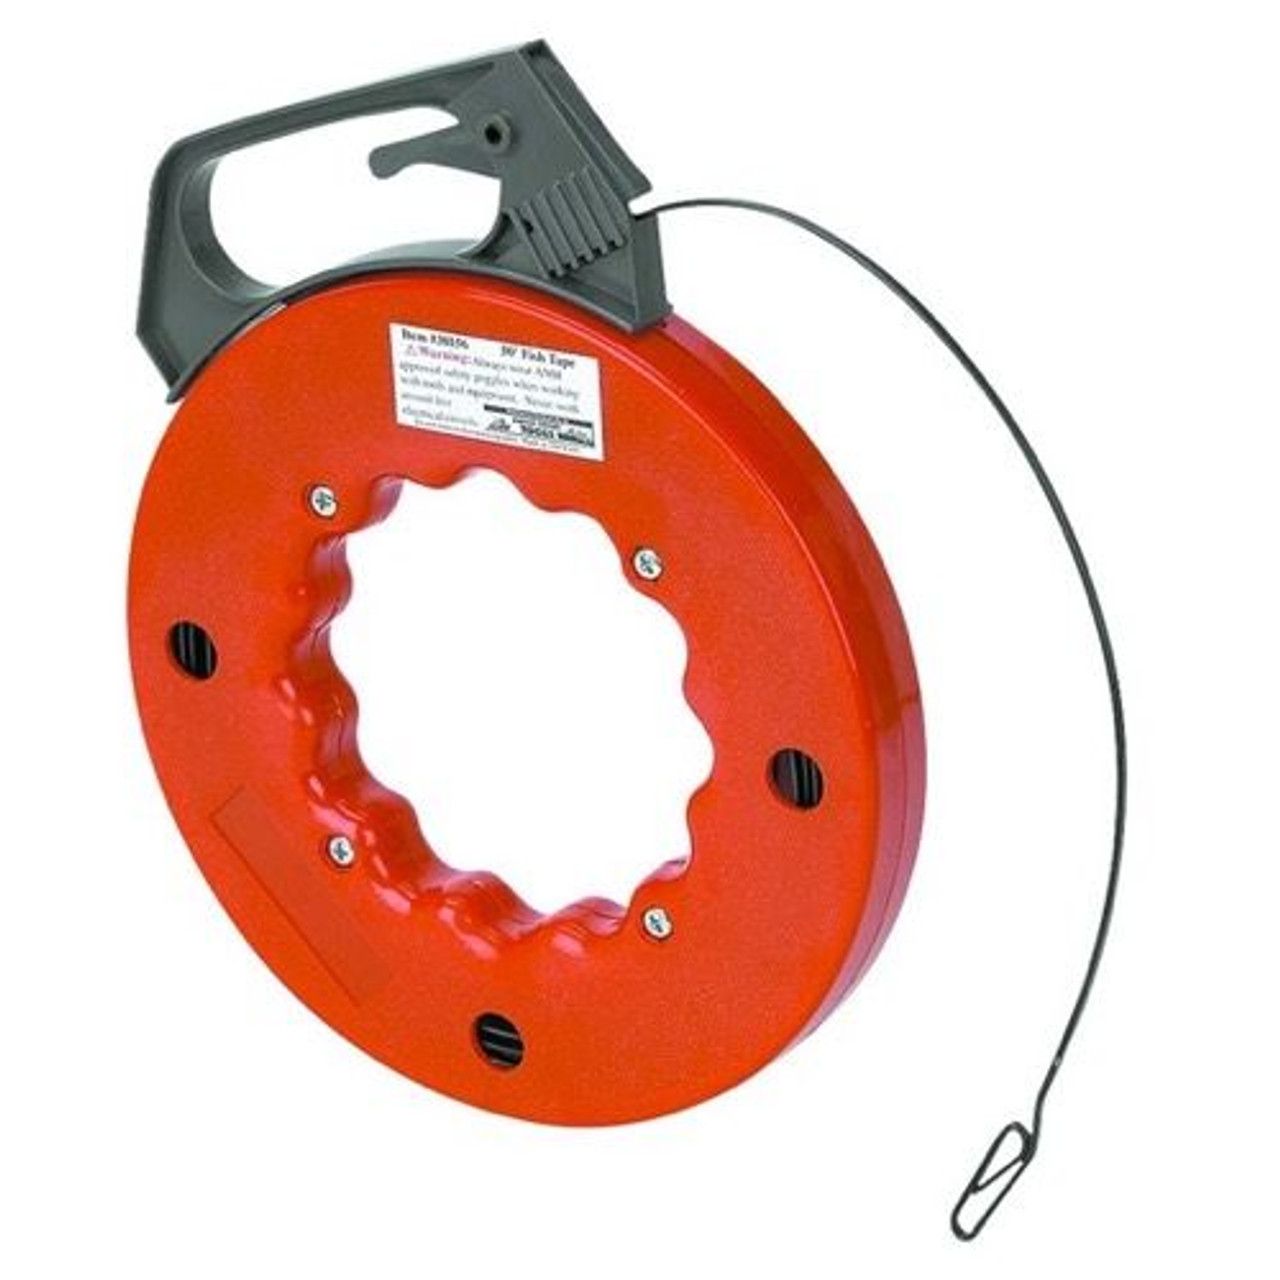 Eagle 50' FT Fish Tape Reel 1/8" Inch Steel Cable Wire Puller Tool Heavy Duty ABS Housing #70 Carbon Steel, Wall Cable Run Fish Tape High Impact Durable Construction with Easy Grip Handle